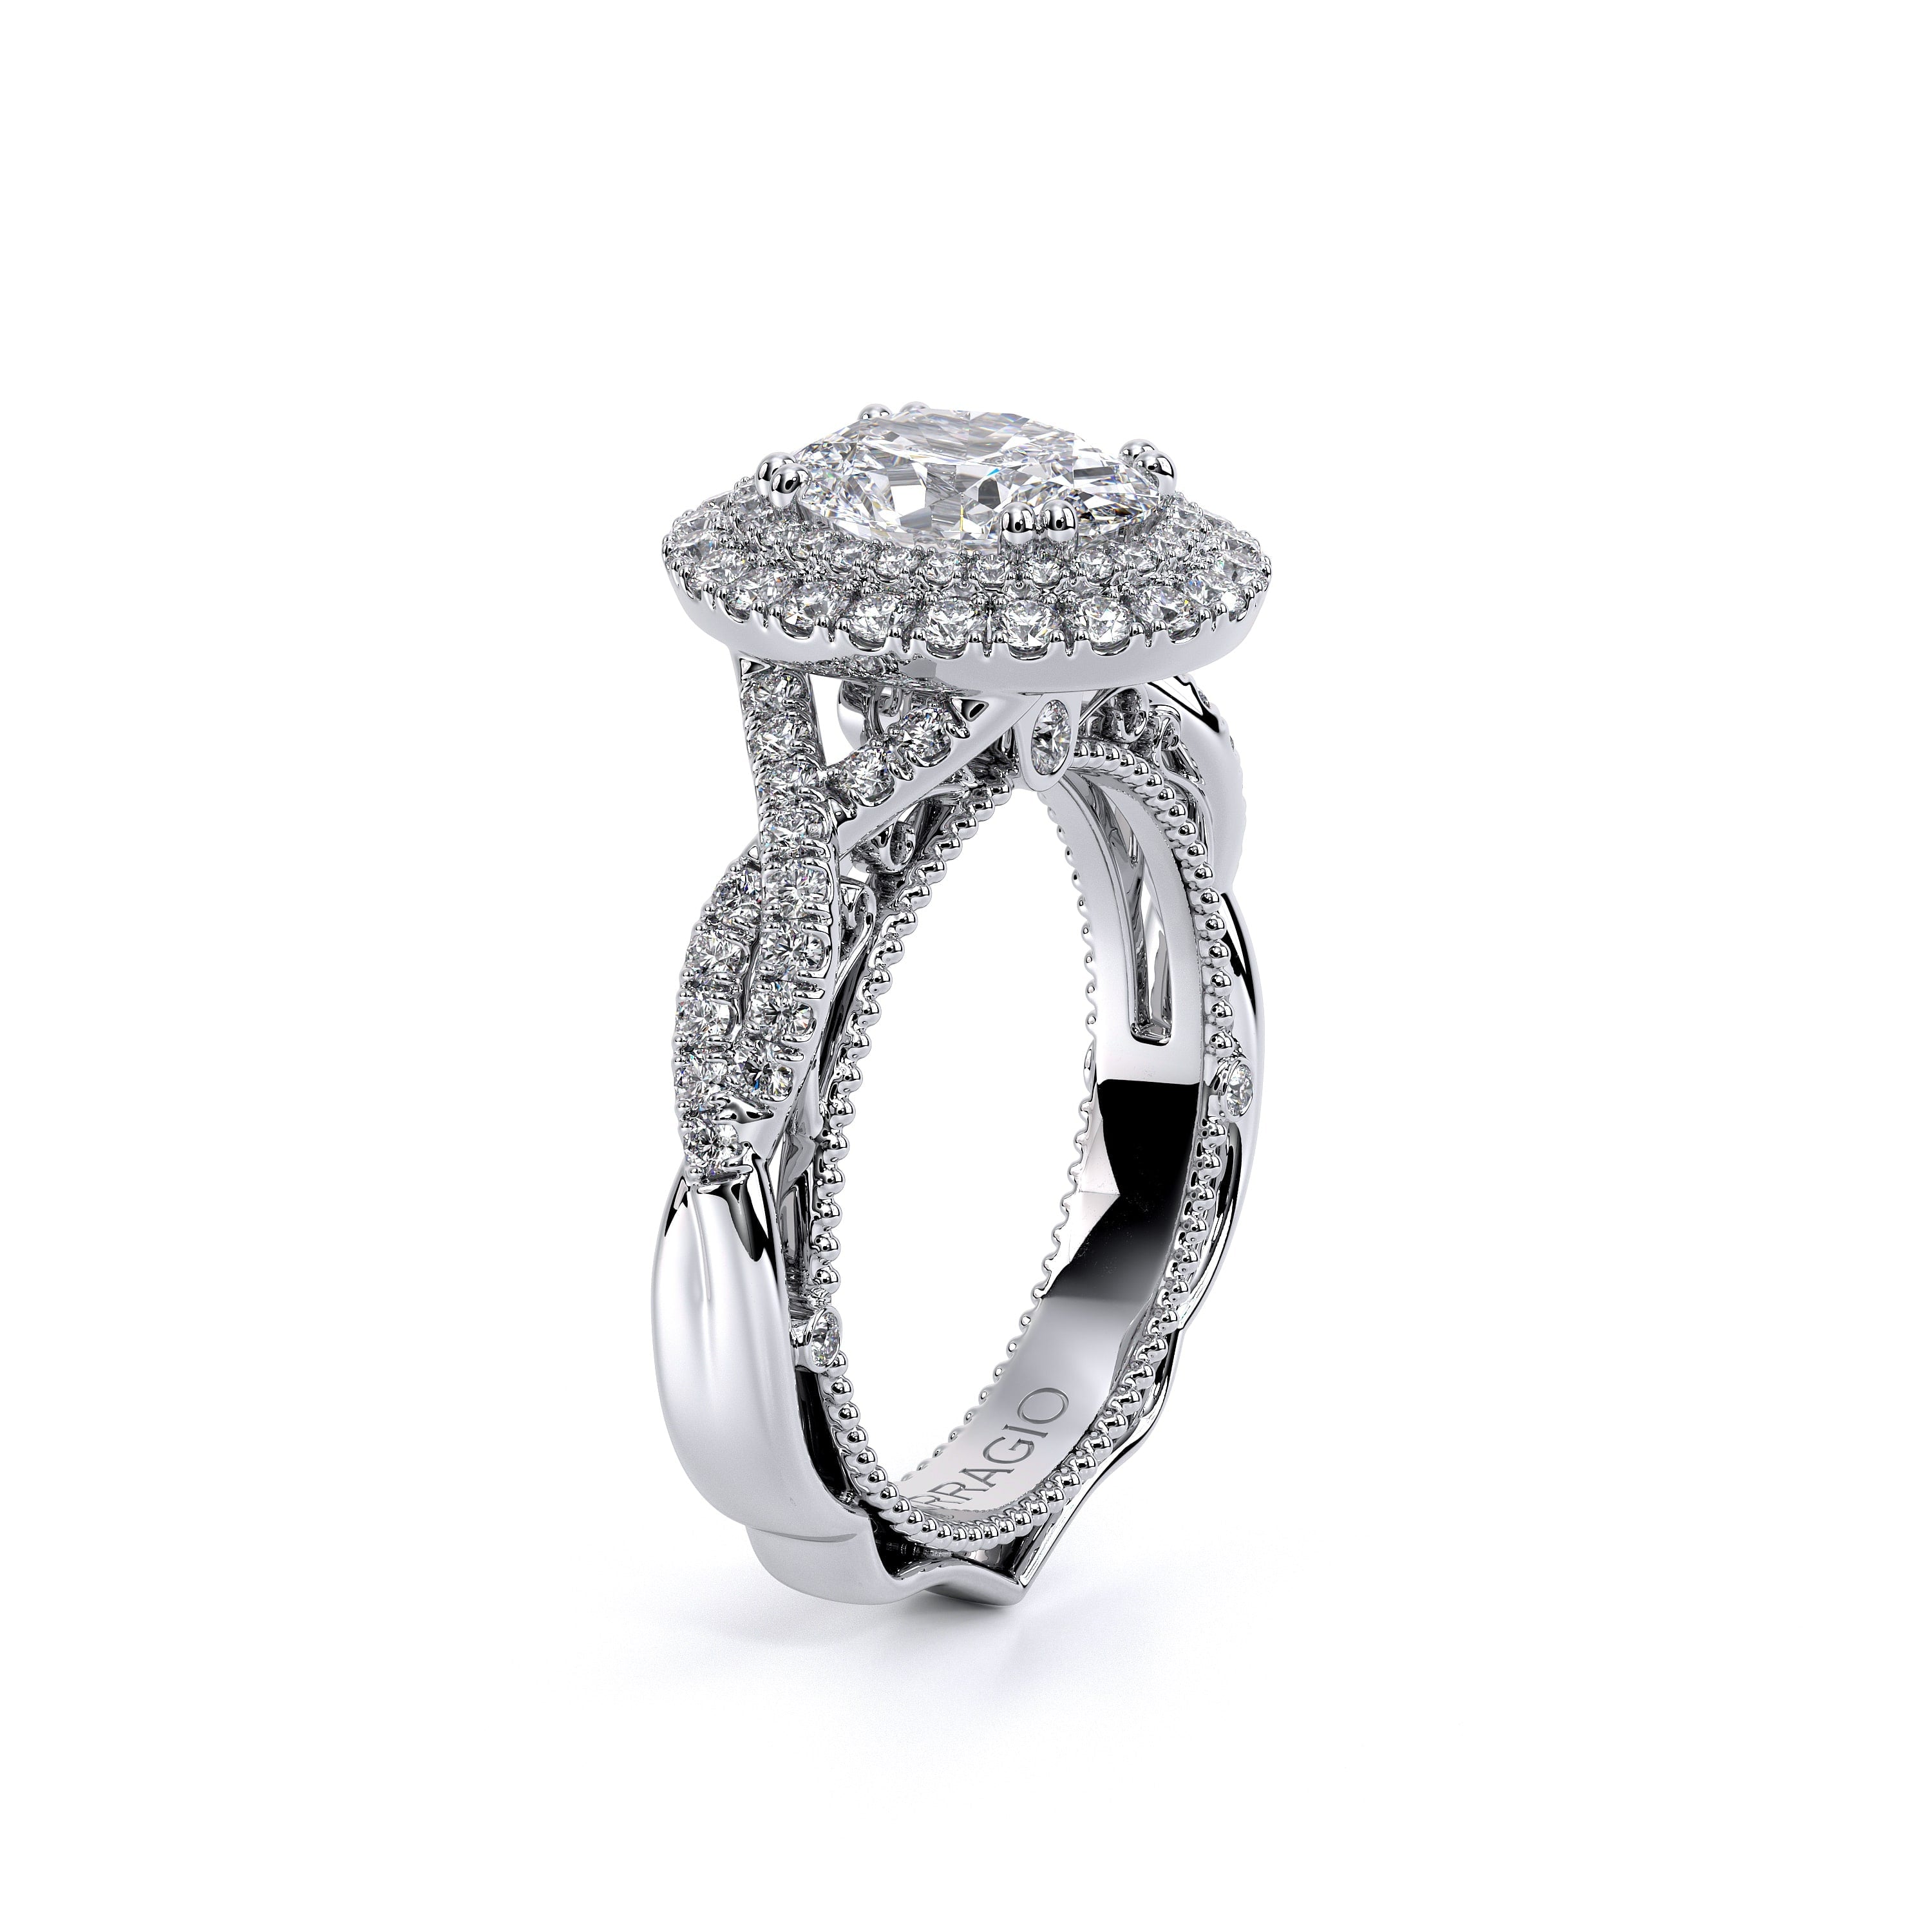 Venetian Oval Double Halo Engagement Ring Setting